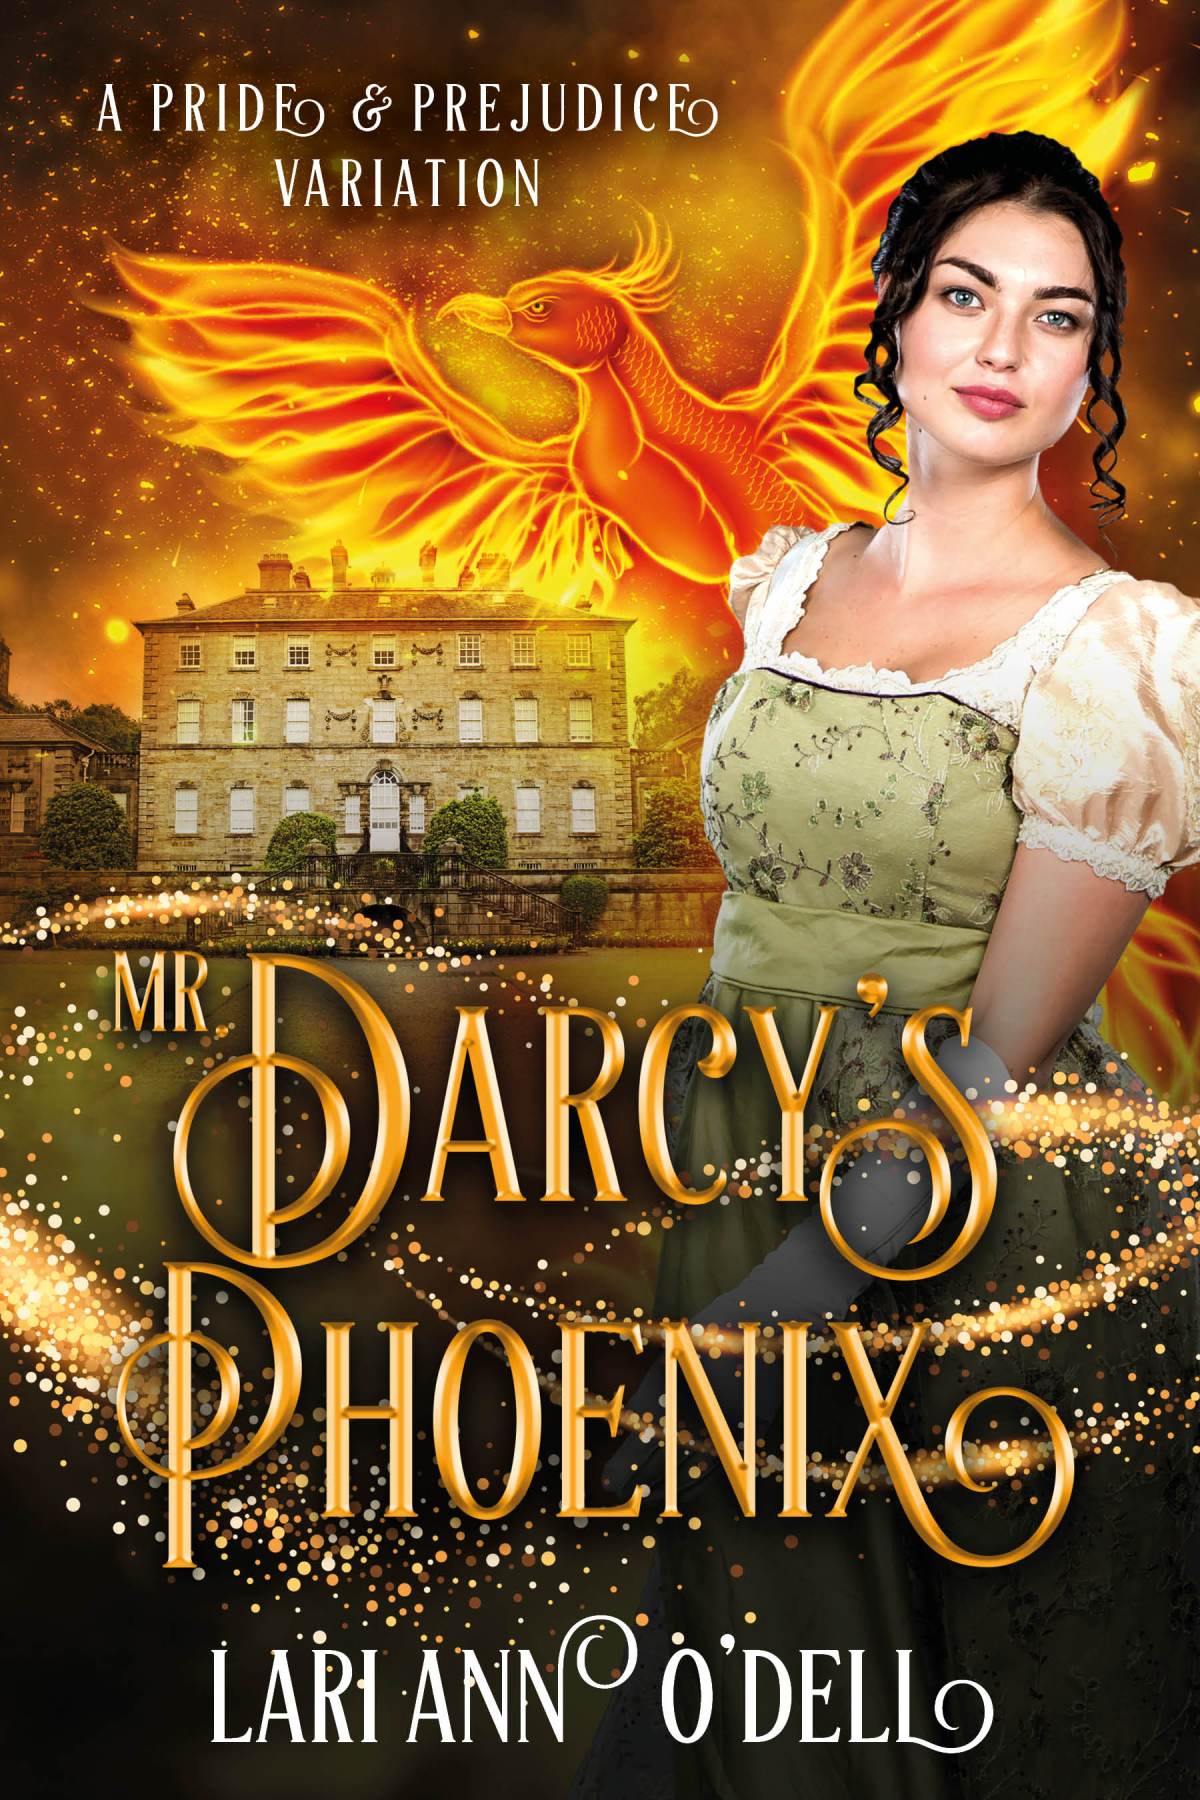 “Mr. Darcy’s Phoenix” by Lari Ann O’Dell, excerpt + giveaway